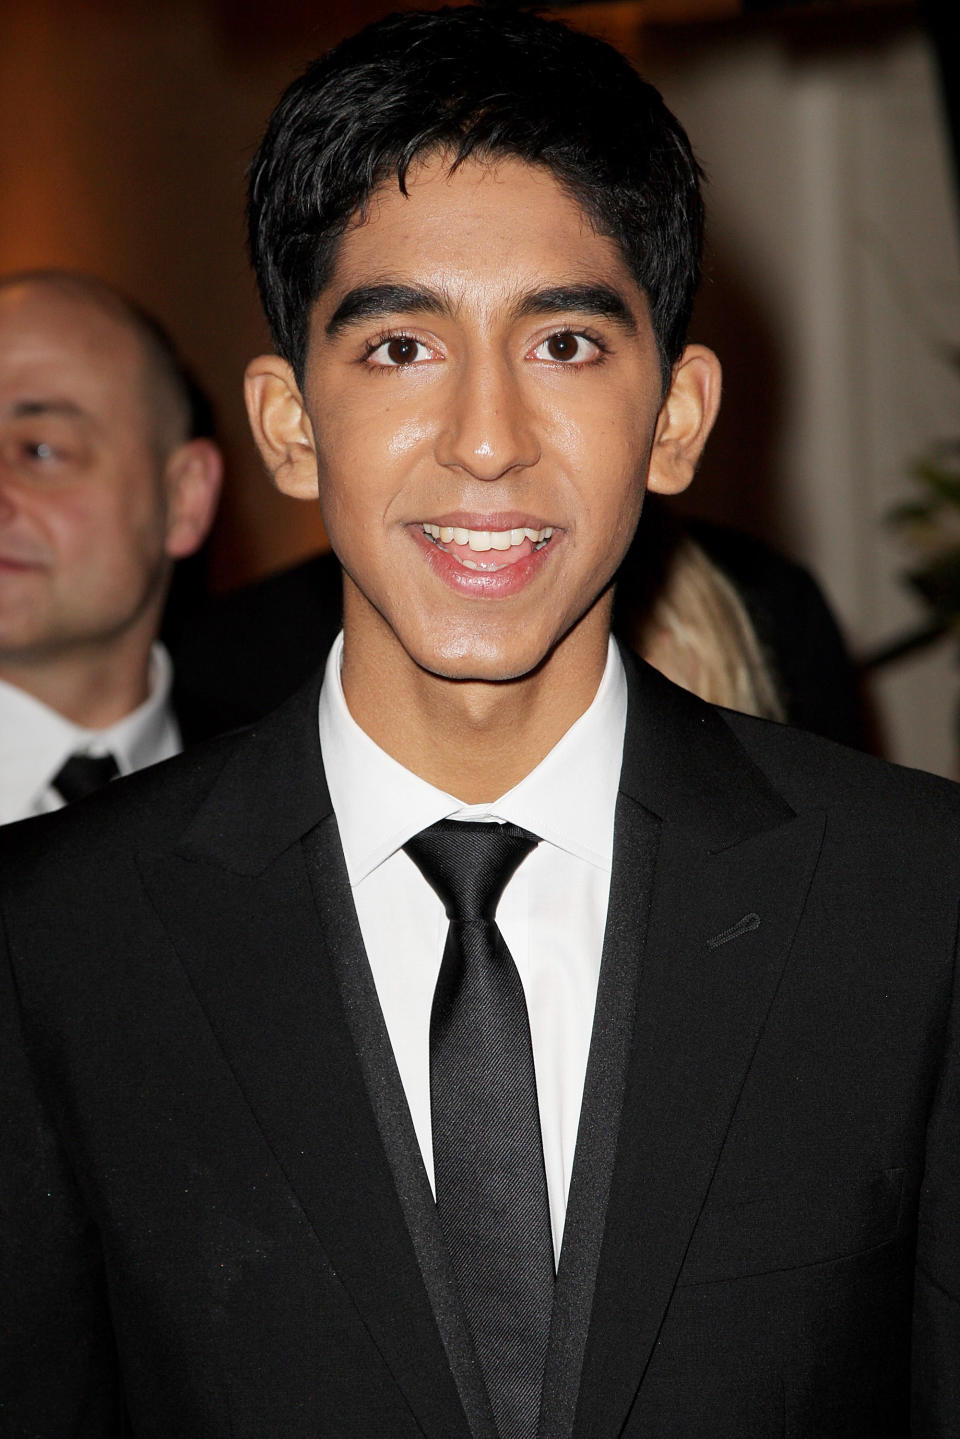 Closeup of a much younger Dev Patel in a suit and tie